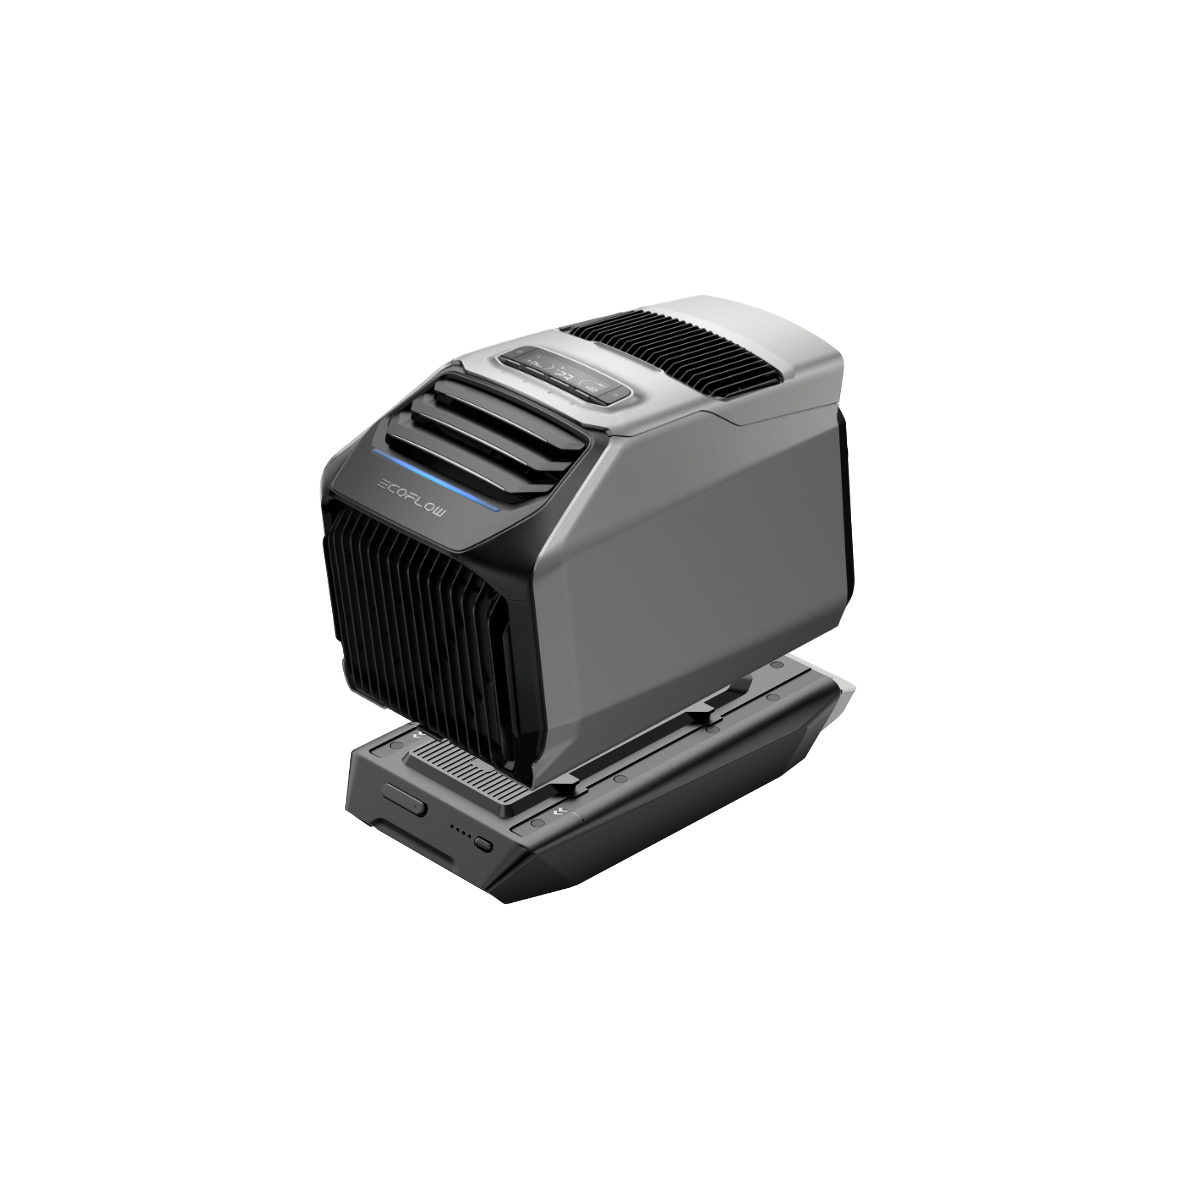 Truck RV Roof Top Electric Air Conditioner for Aire Acondicionado 12V Air  Conditioning - China Rooftop Air Conditioner, Truck Air Conditioner